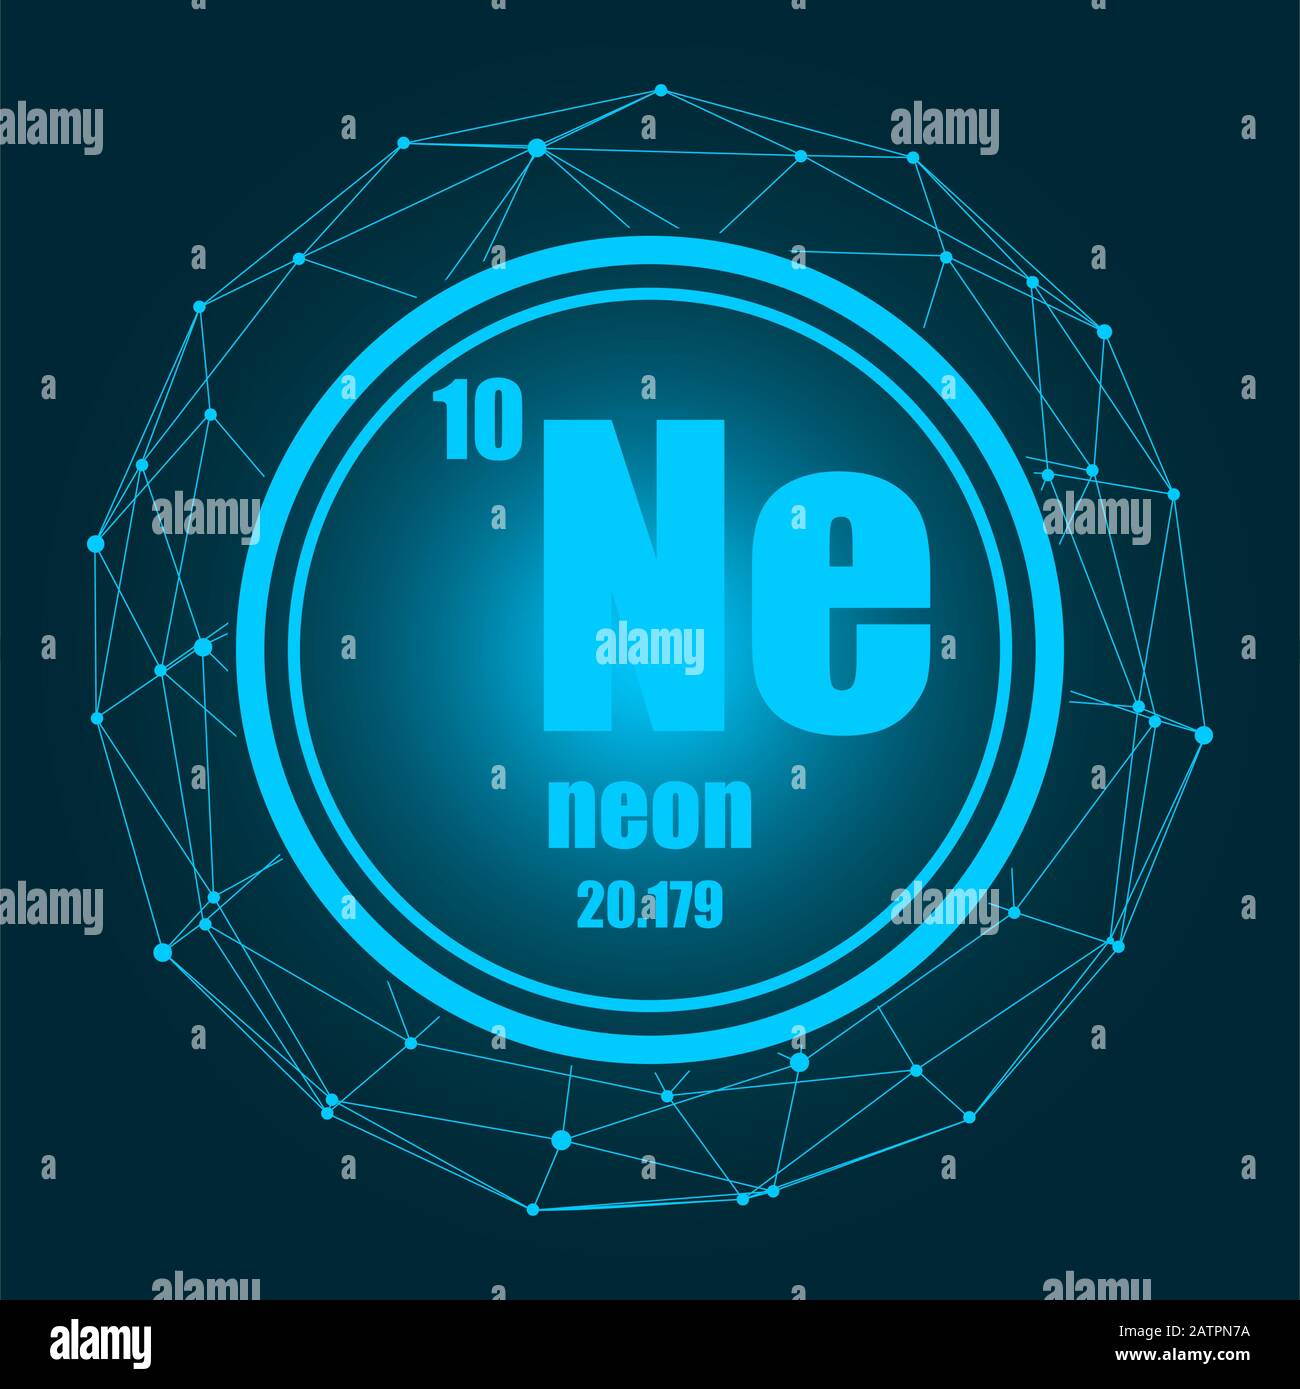 Neon chemical element. Stock Vector